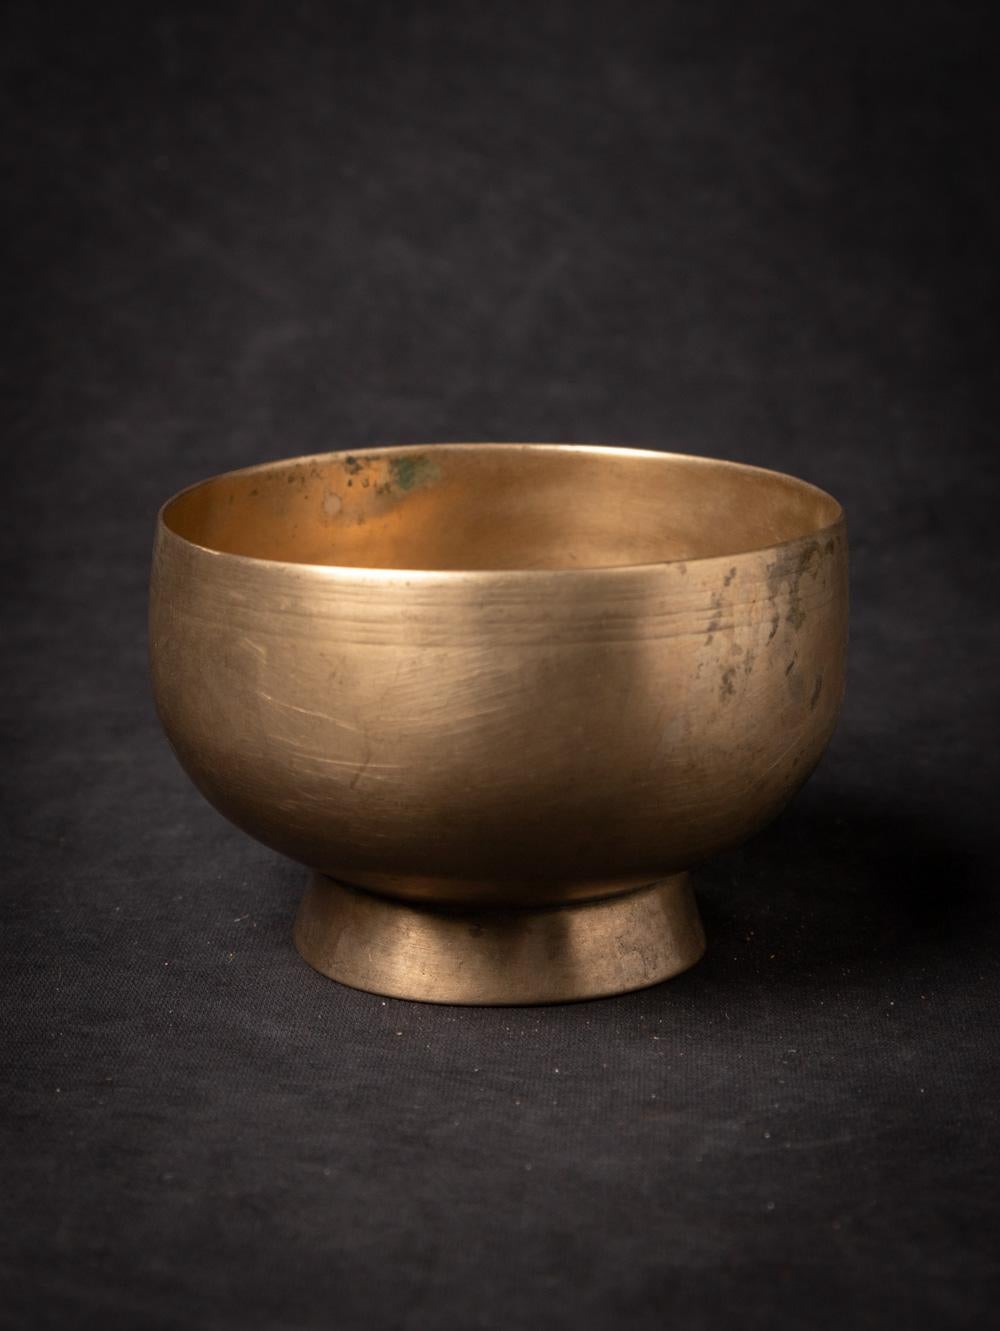 This antique bronze Nepali Singing bowl originates from Nepal and dates back to the early 20th century. Crafted from bronze, it showcases the rich cultural heritage of Nepal. The bowl stands at a height of 8,5 cm with a diameter of 12,5 cm, making